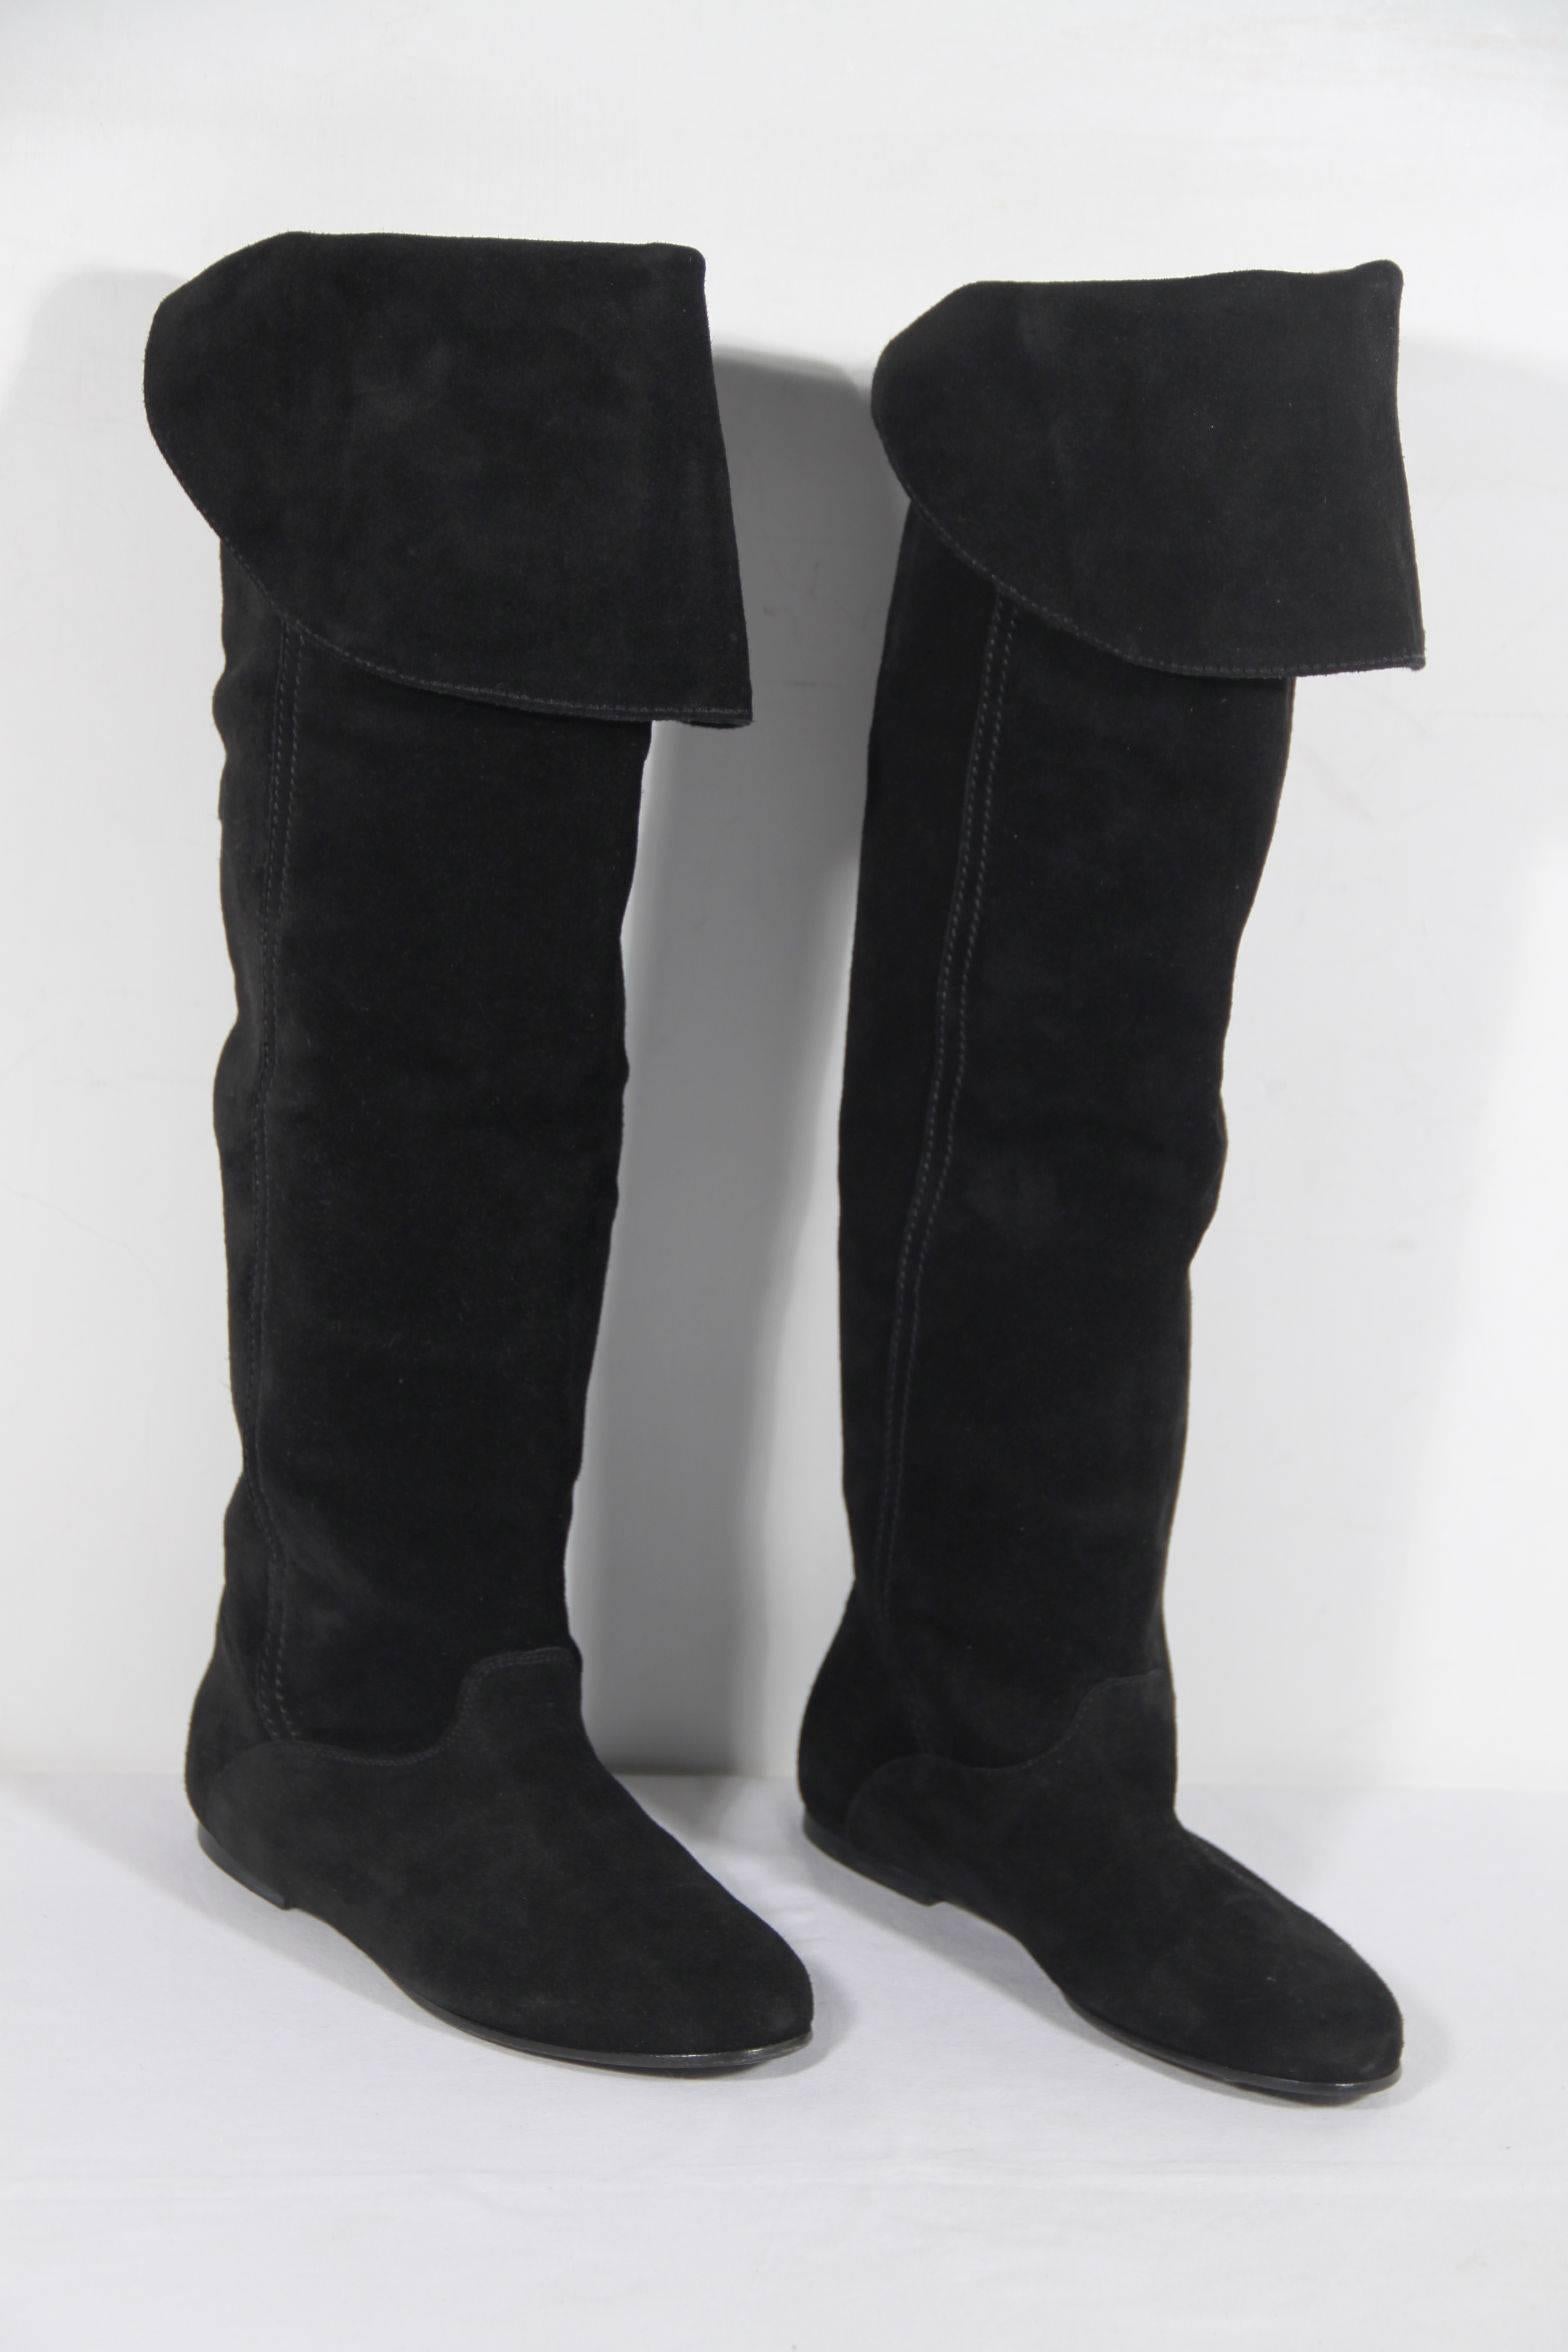 Women's WEEKEND by MAX MARA Italian Black Suede FLAT Knee BOOTS Shoes SIZE 37